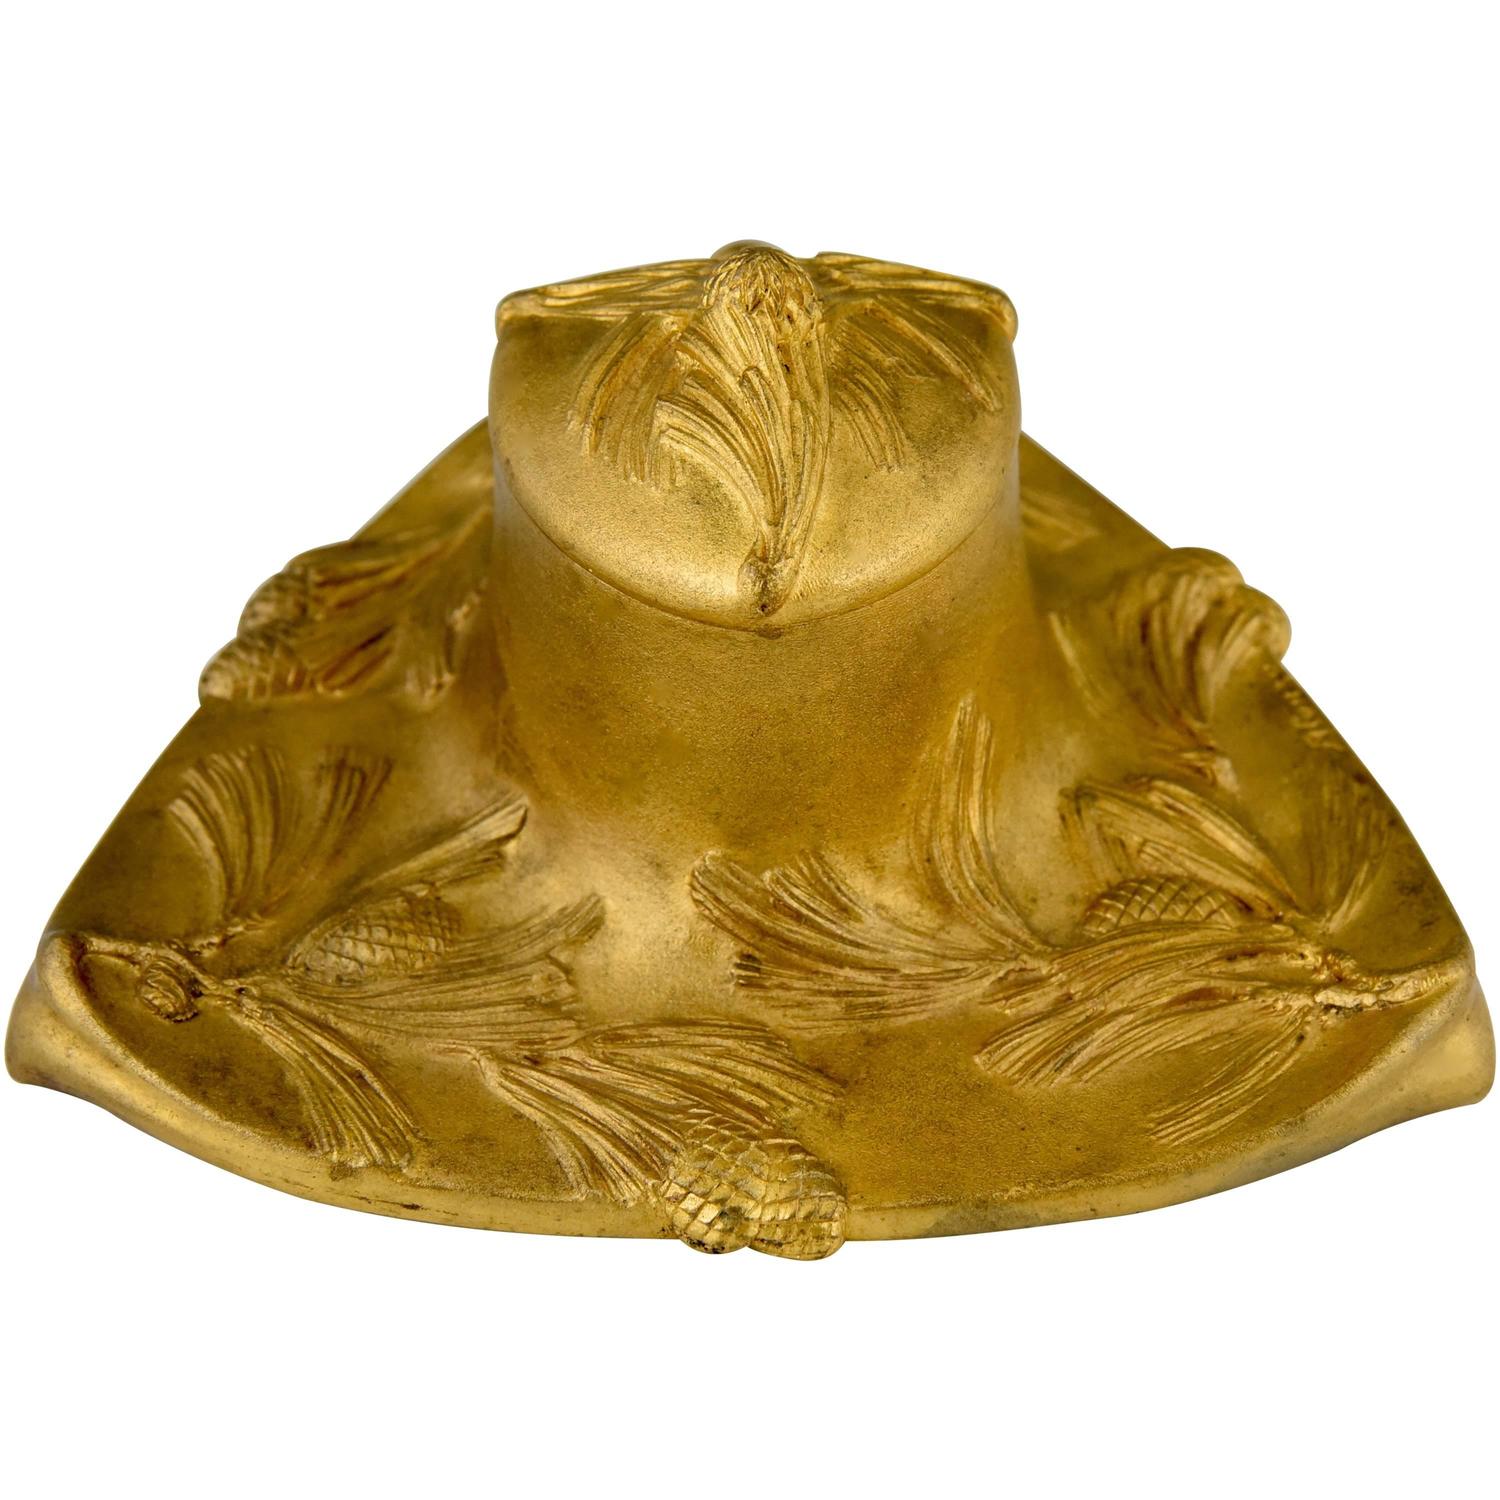 Art Nouveau gilt bronze inkwell with pine cones.